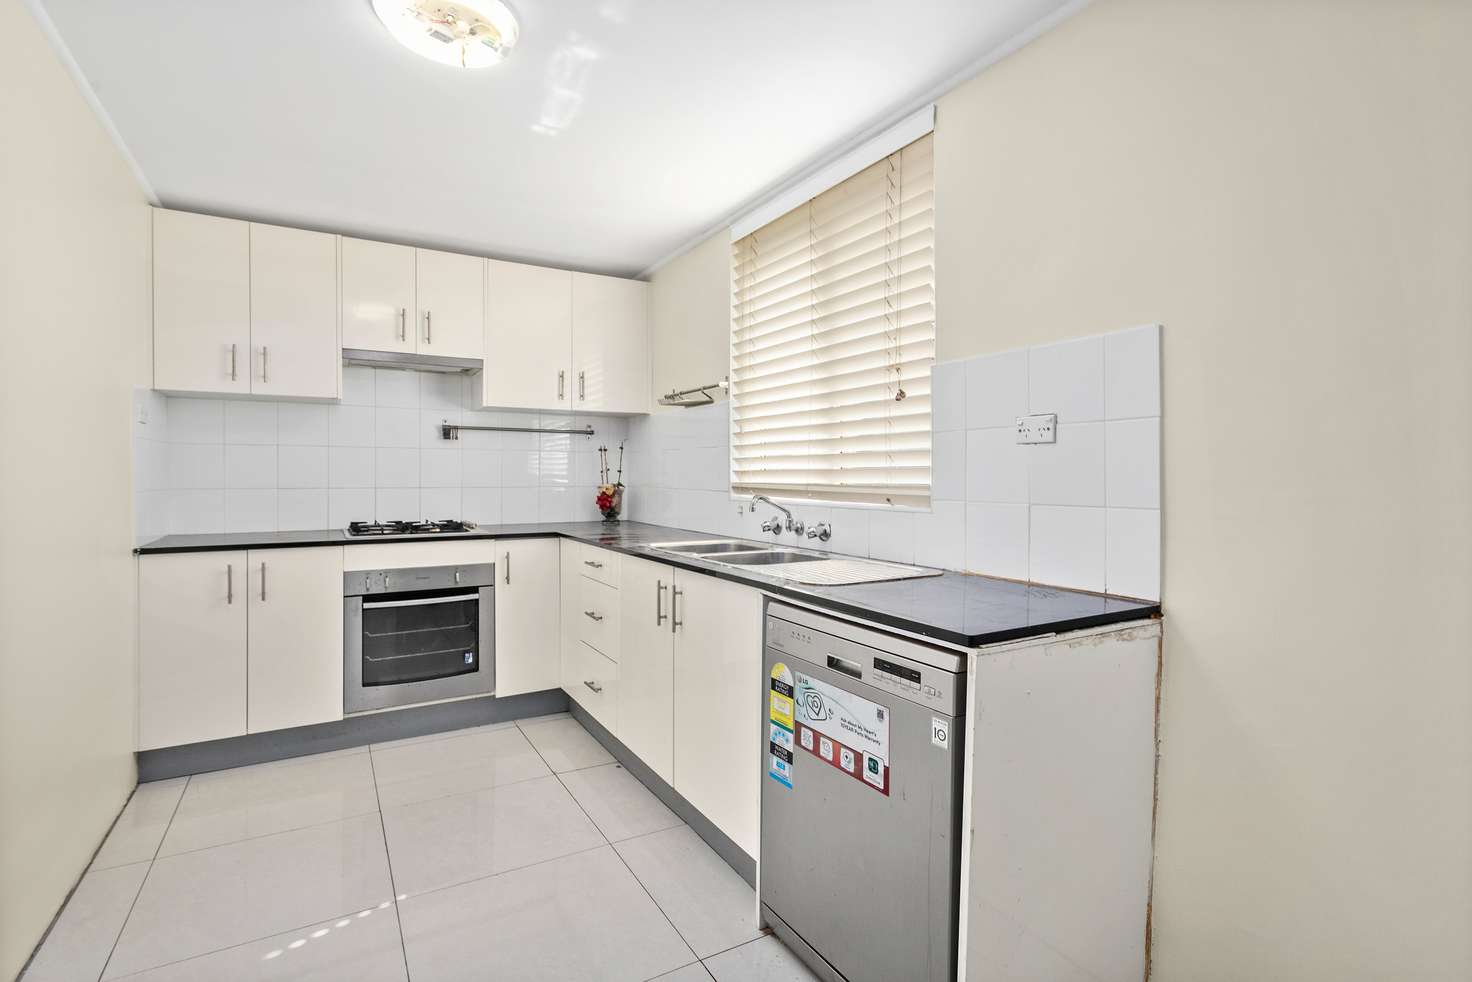 Main view of Homely apartment listing, 62 Byrnes Street, Bexley NSW 2207